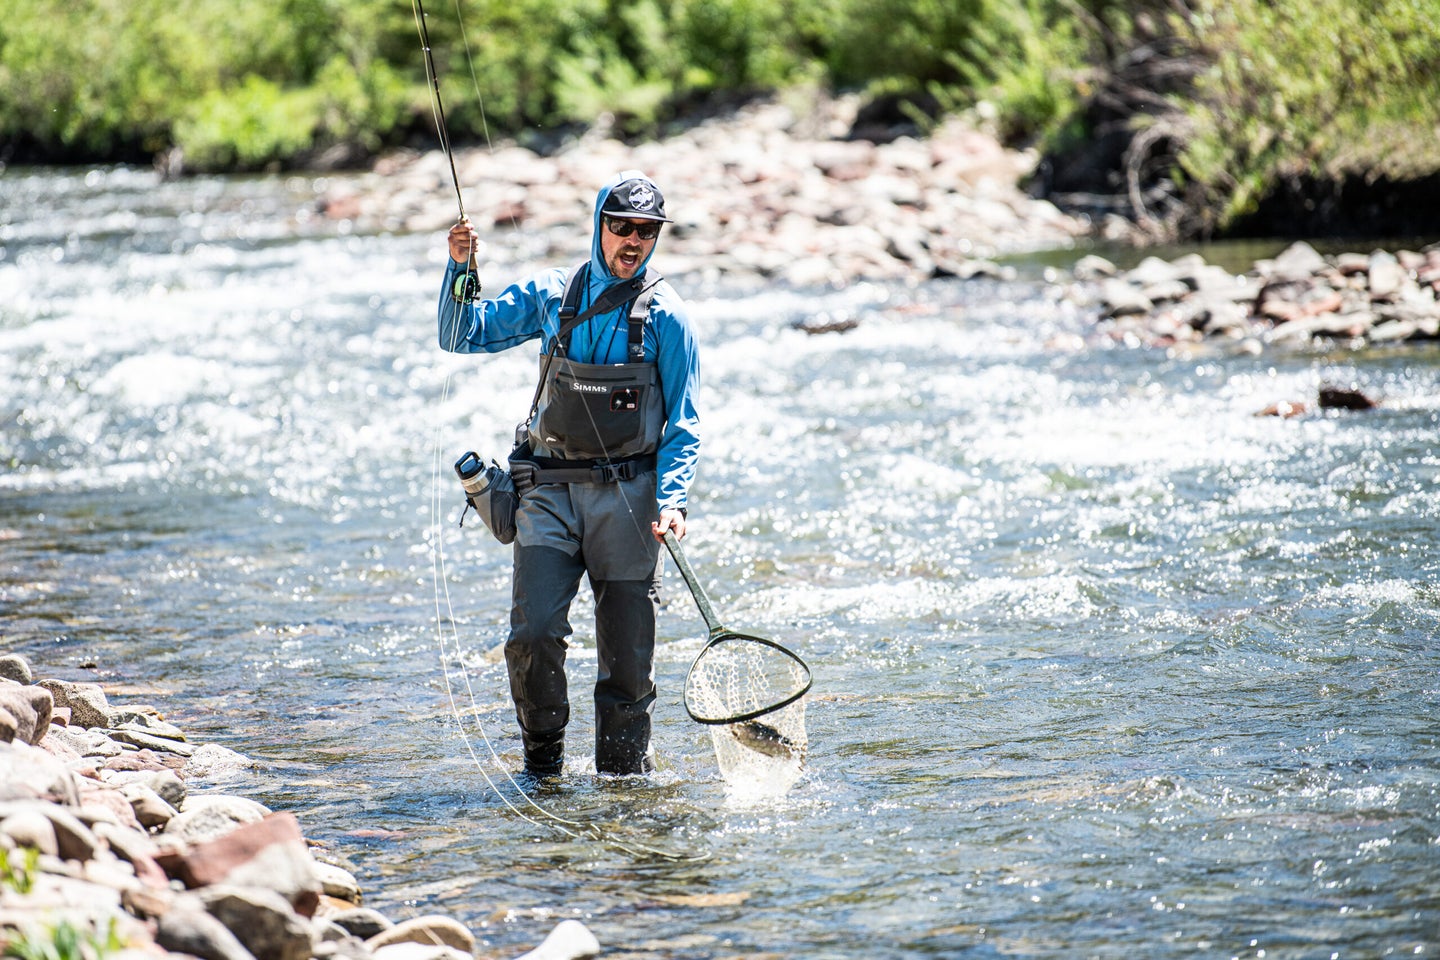 The new Simms G3 Guide Waders